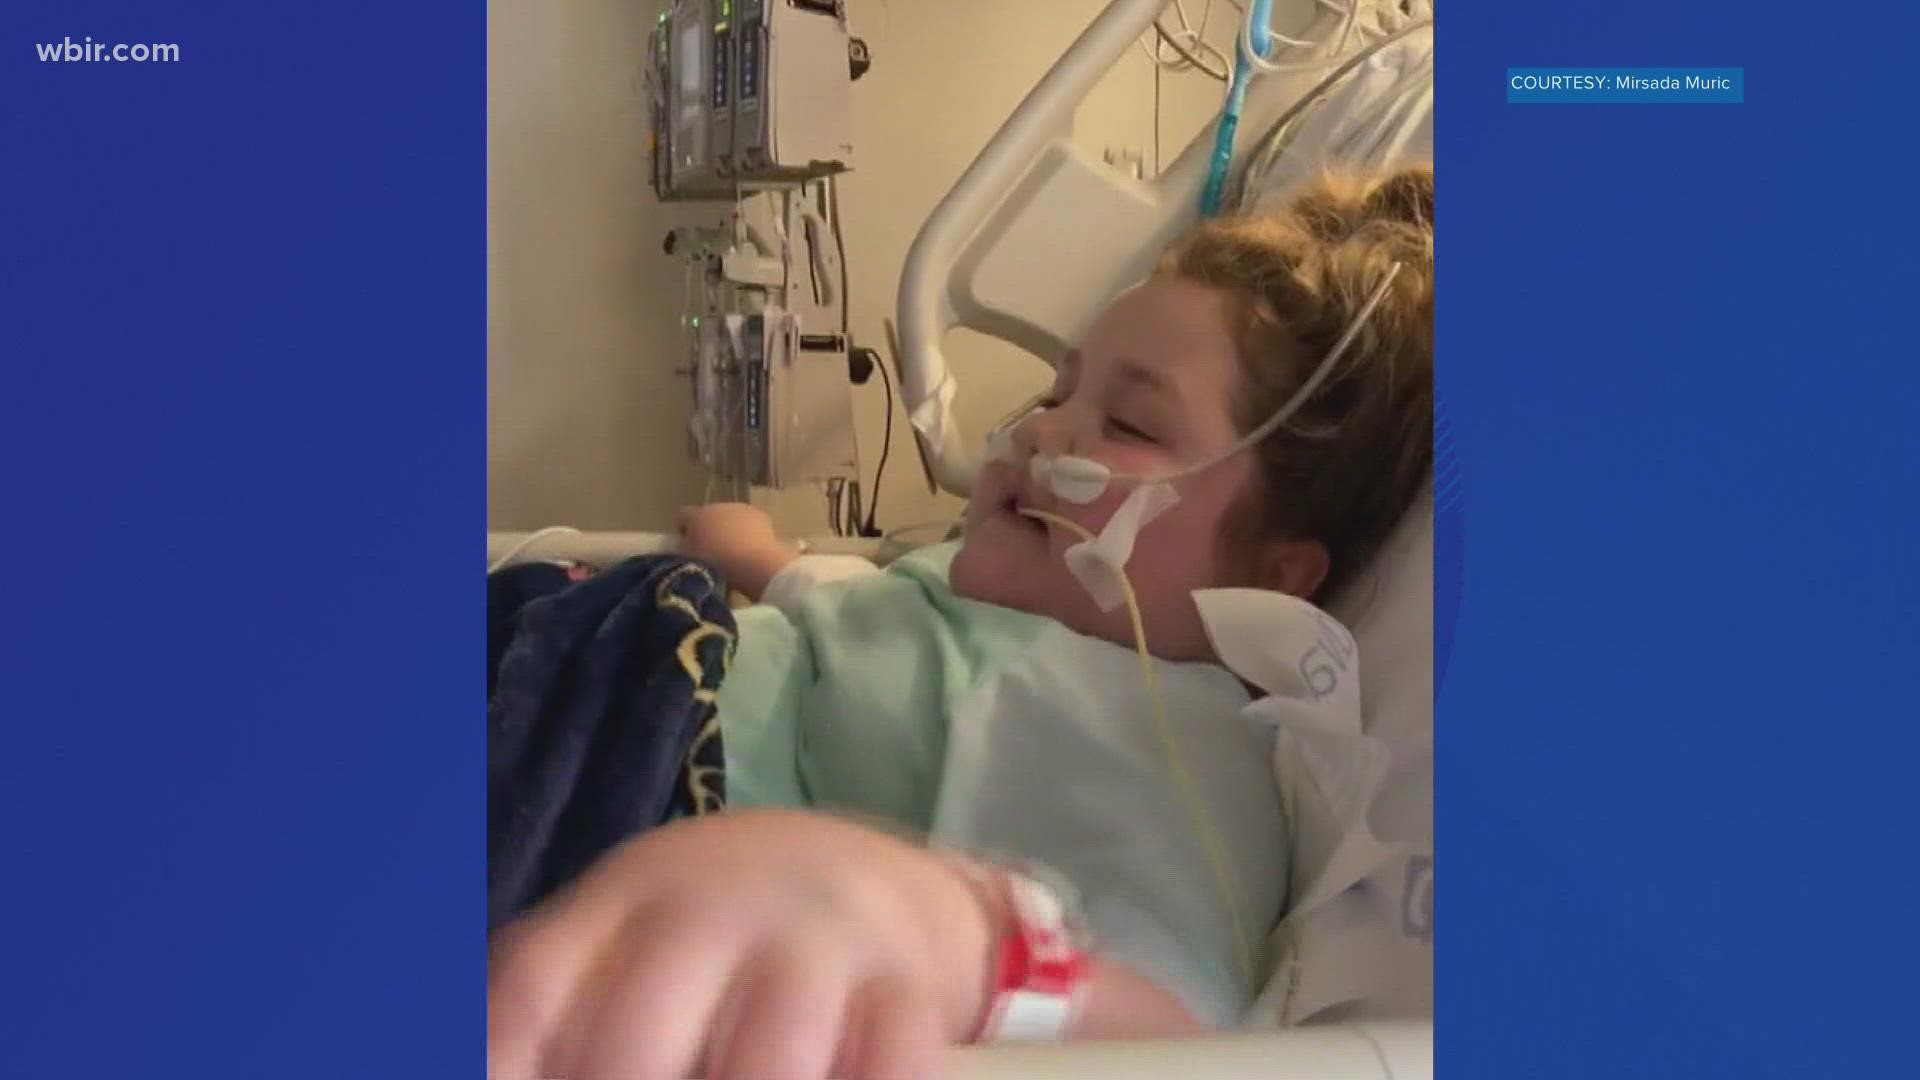 9-year-old Blair has been battling coronavirus in the pediatric intensive care unit for more than a week.